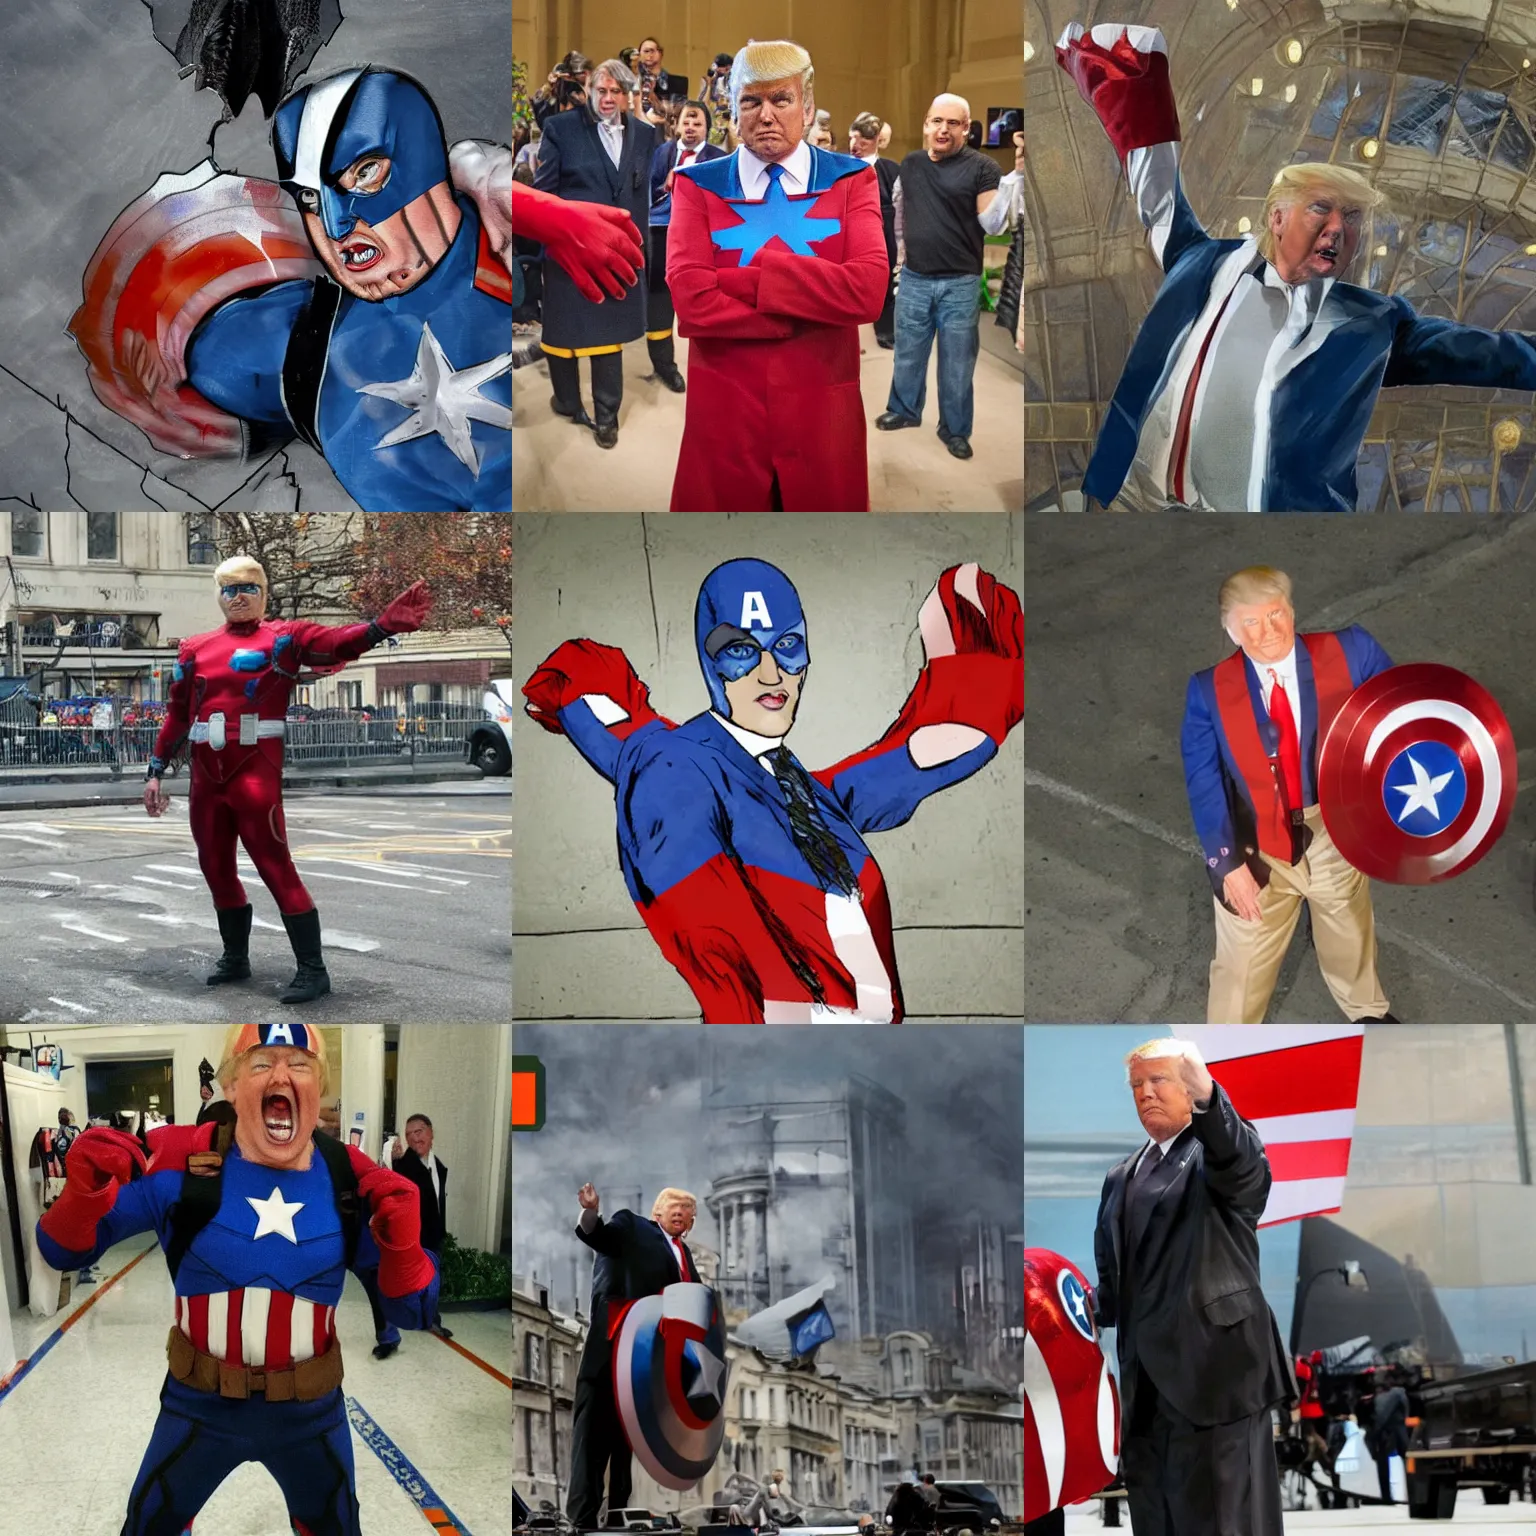 Prompt: Donald Trump, dressed as Captain America, defeating Russia